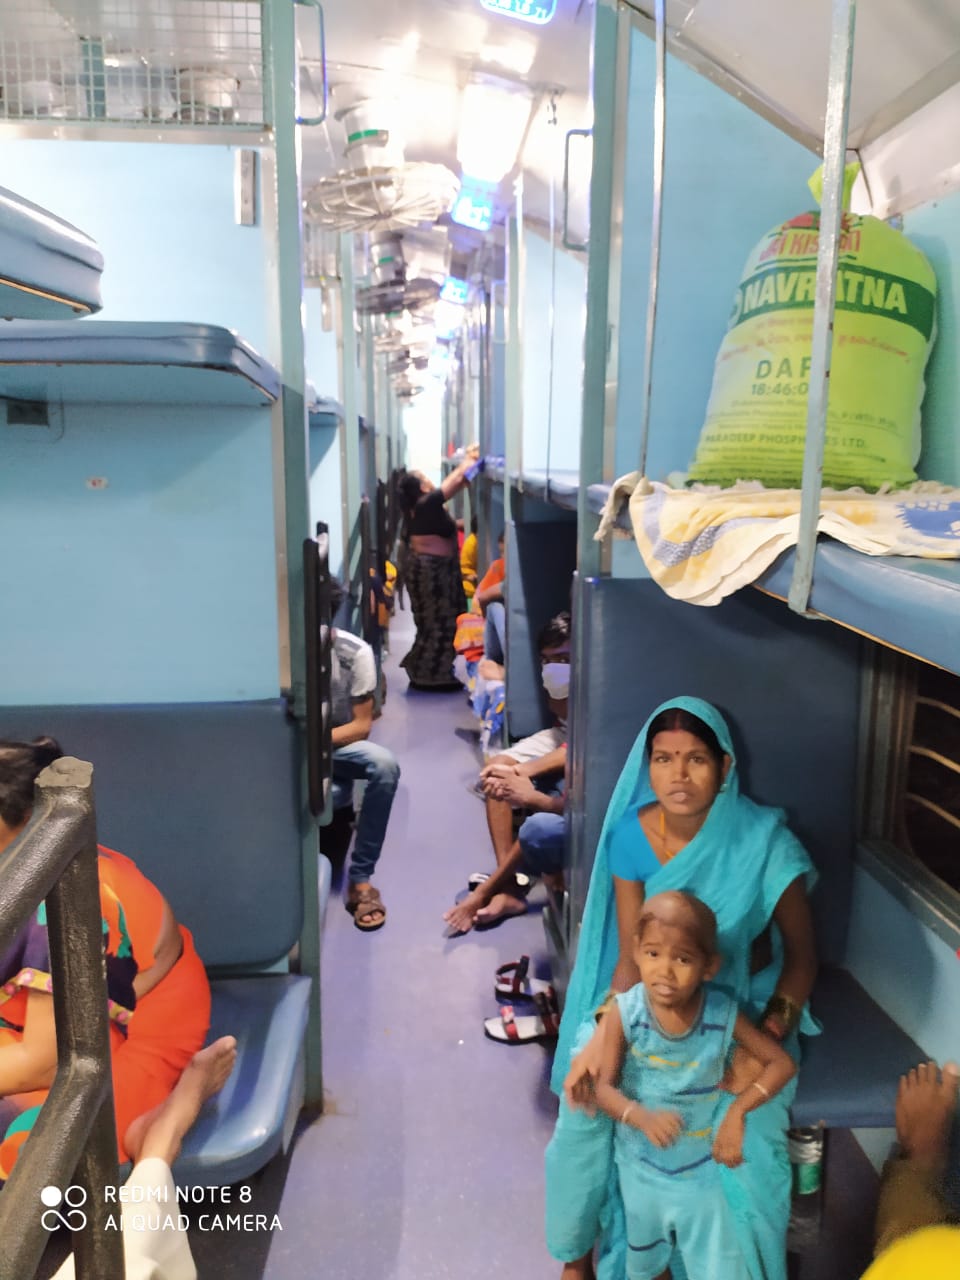 Two women deliver babies on Shramik trains in UP